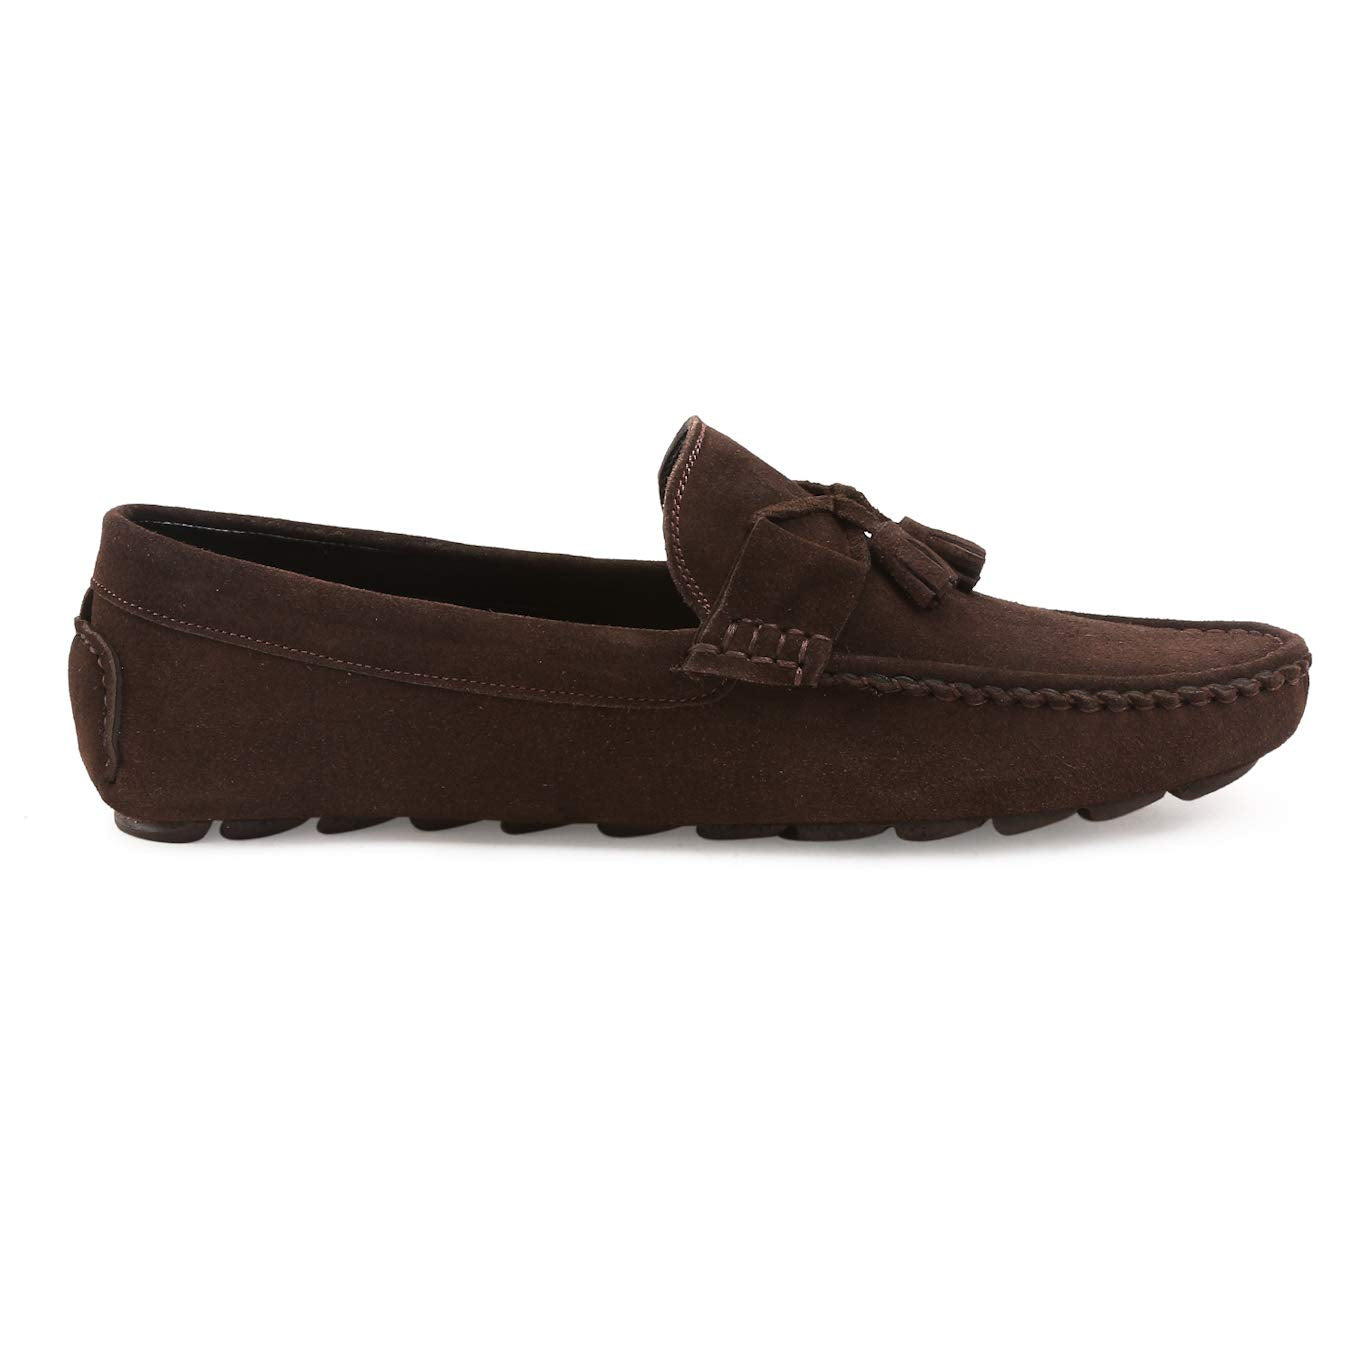 LOUIS STITCH Men's Brunette Brown Italian Leather Suede Loafer Tassel Penny Casual Loafers for Men (ITSUTABB-) (Size- 10 UK)